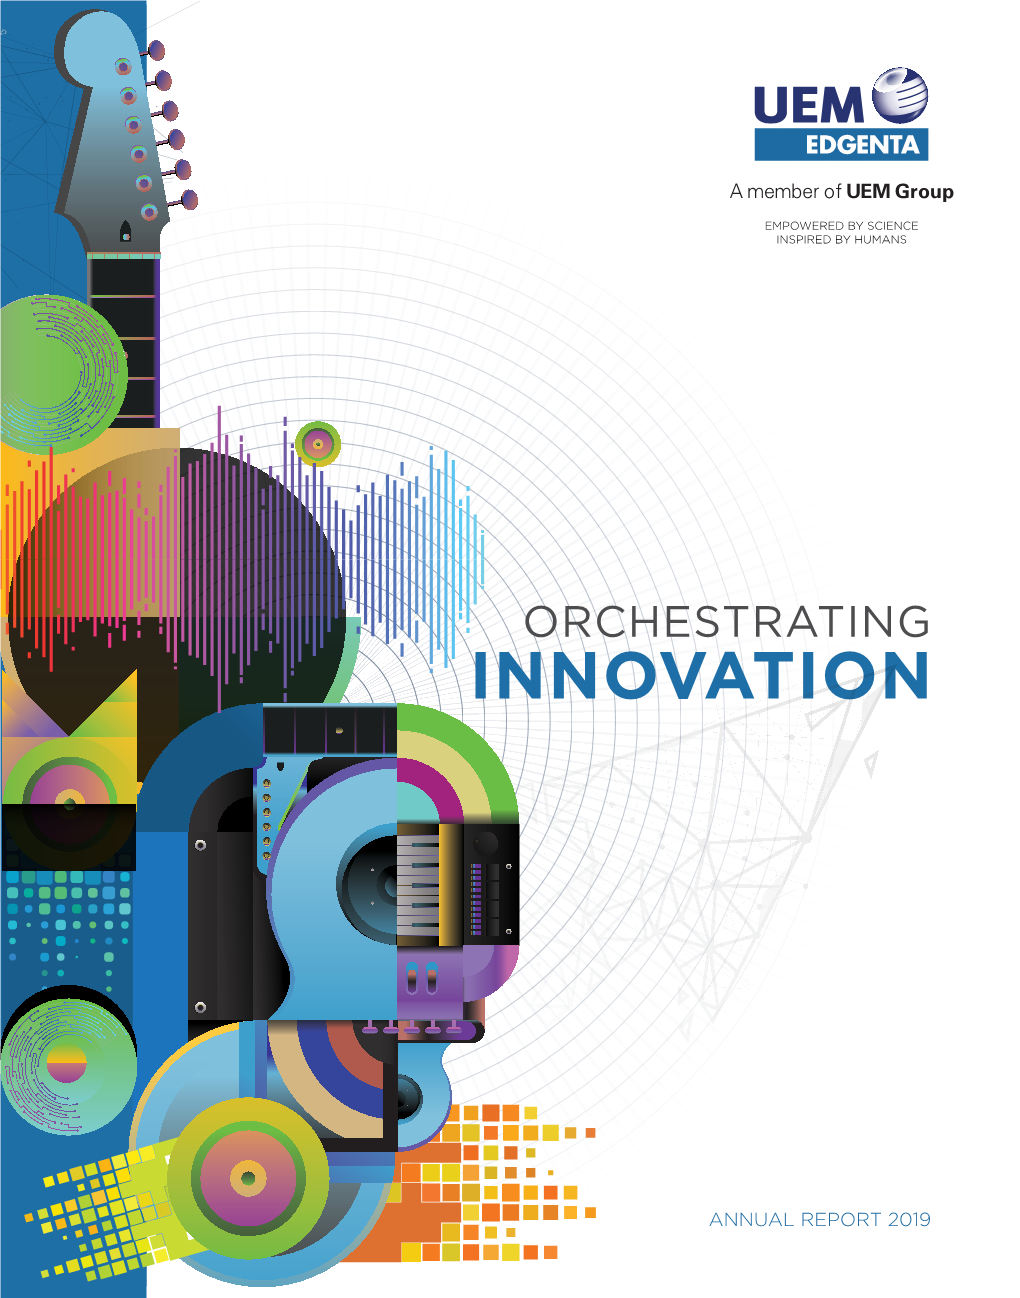 Annual Report This Year Symbolises Our Theme of Orchestrating Innovation, Reflecting the Innovative Solutions Our Businesses Are Anchored On